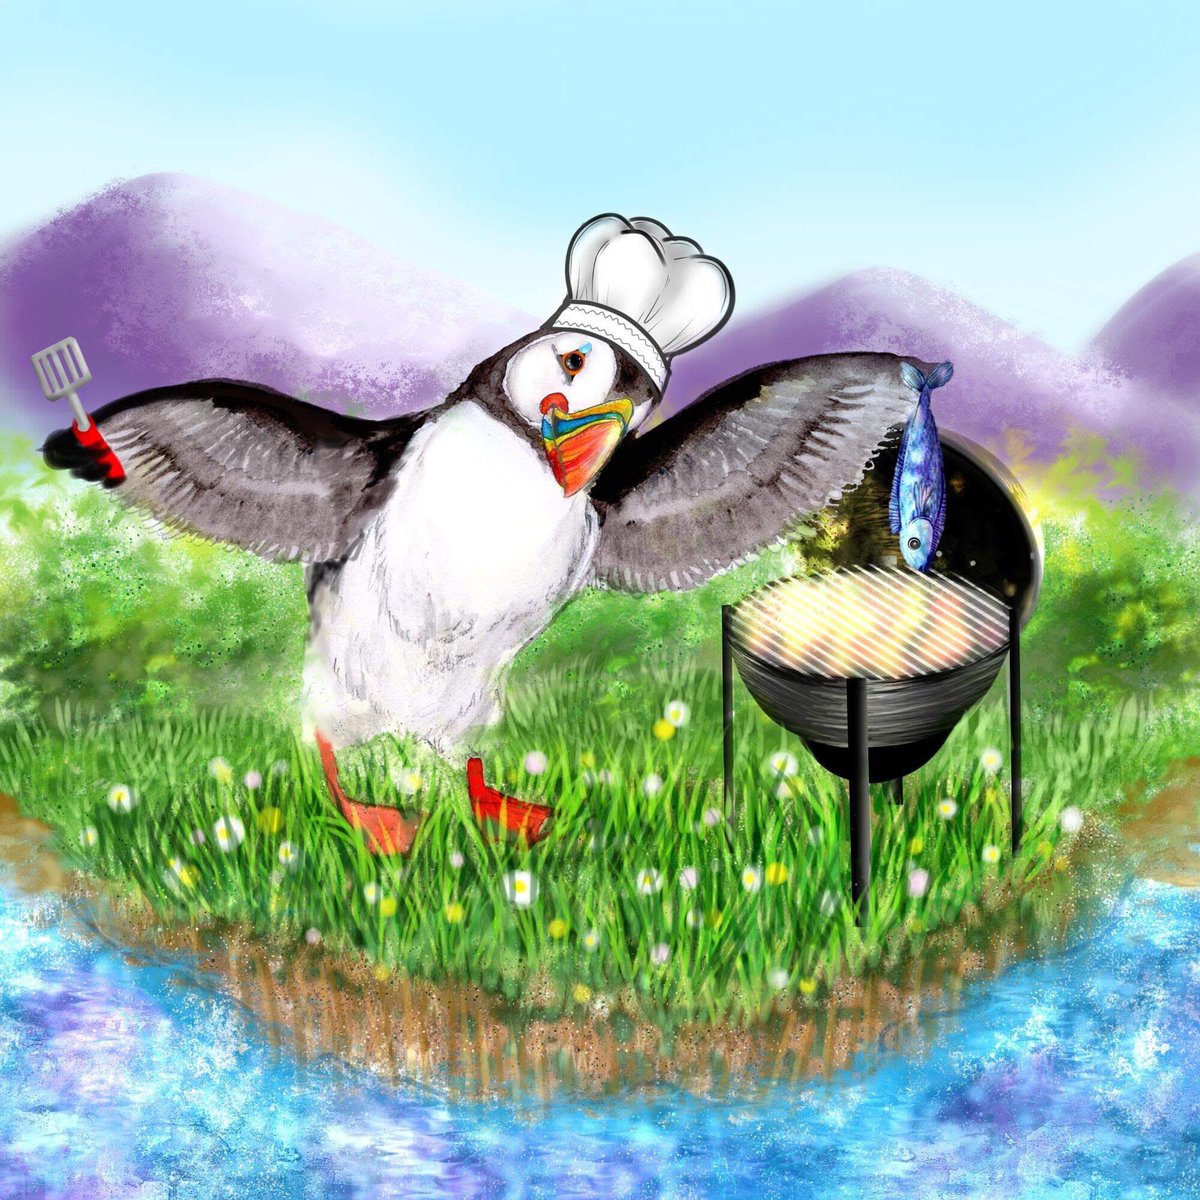 Last but not least... it’s a BBQ BOY! This is BBQin’ Puffin, cooking a fish supper🐟 if only I lived somewhere as beautiful..oh wait! 😏
Feeling extra smug now that it’s warming up that I’m lucky enough to live in such a beautiful place ☀️
 #bbq #snowdonia #snowdoniamountains